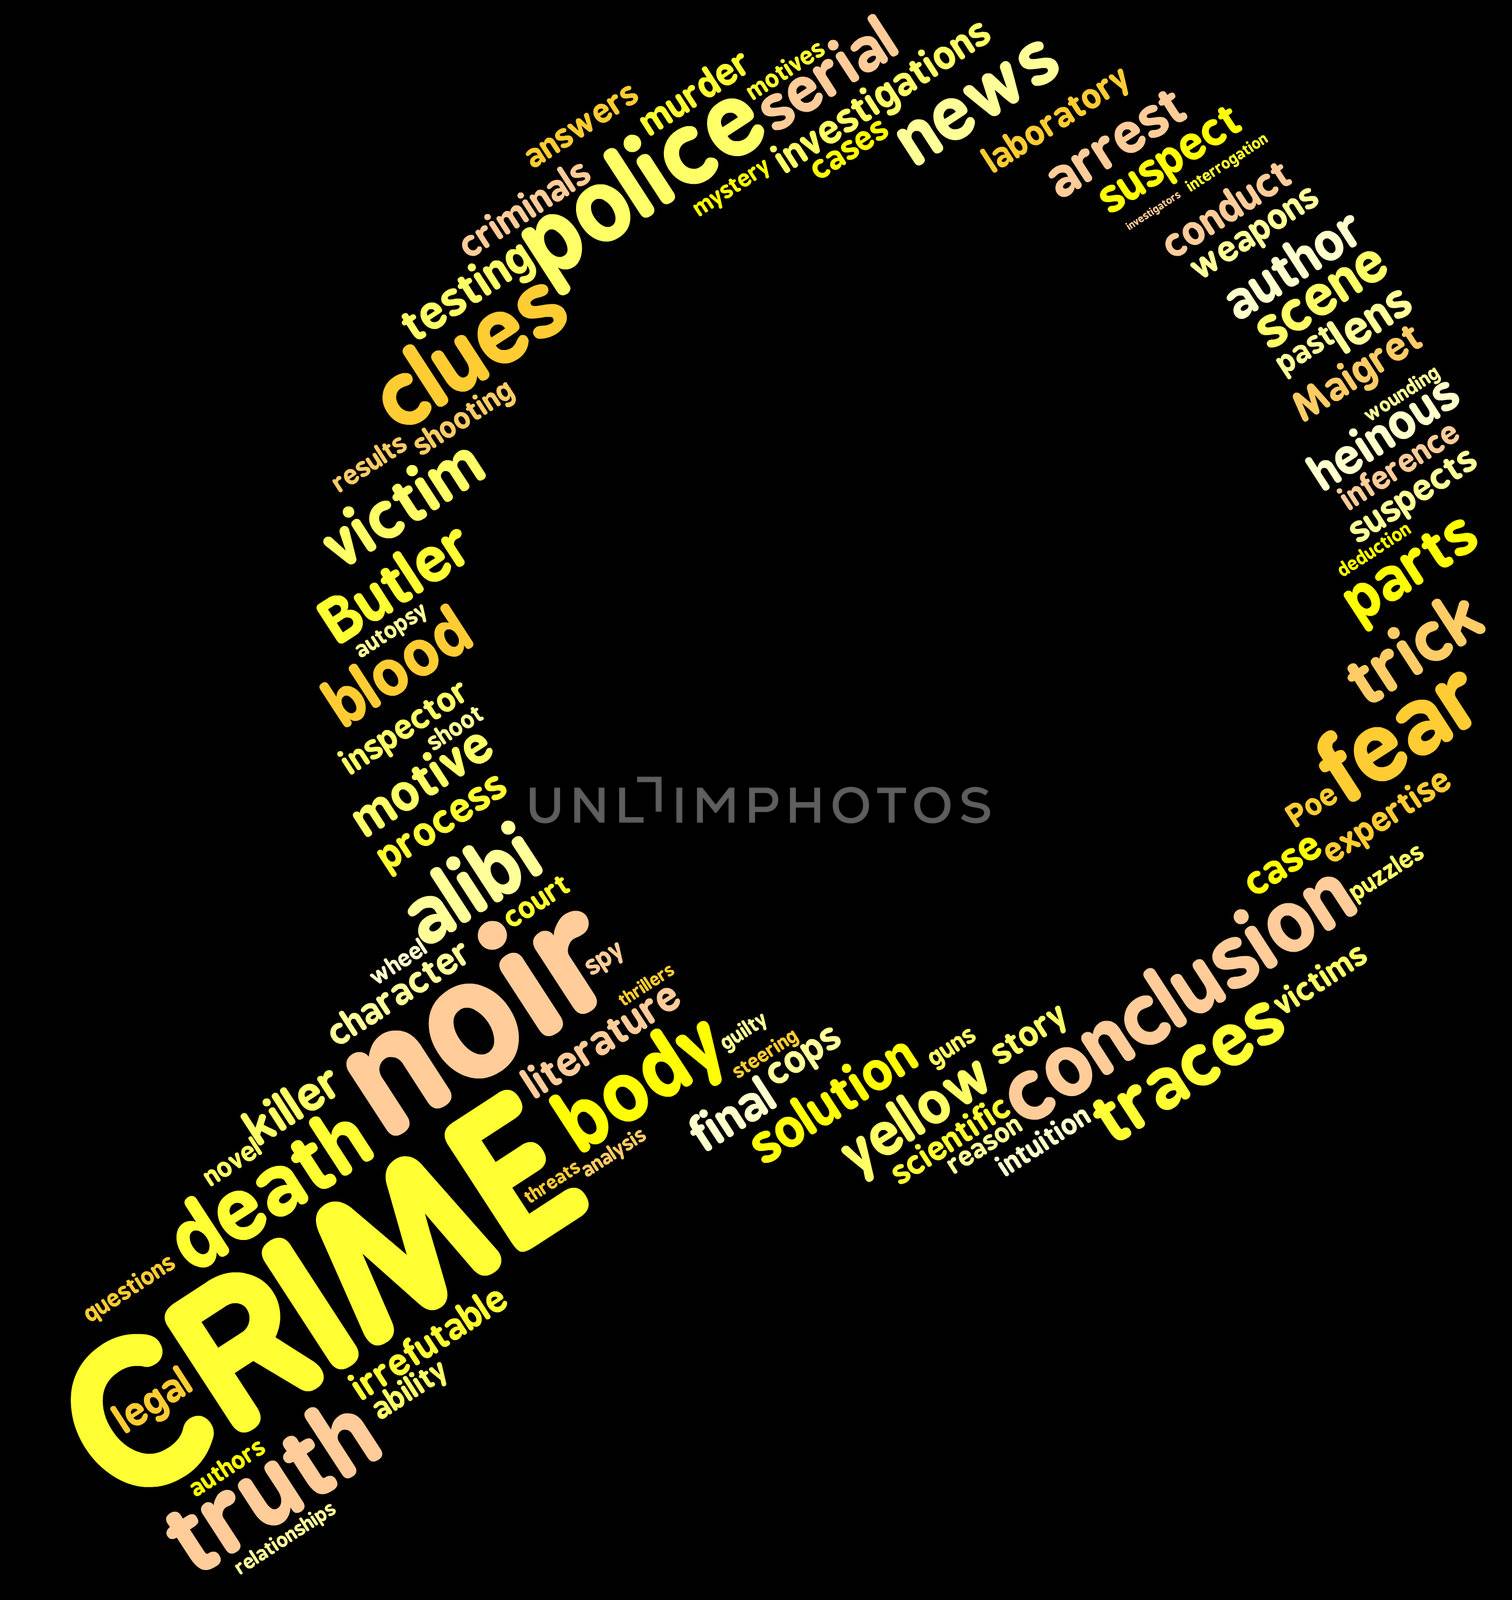 Investigation lens symbol tag cloud with yellow words over a black background